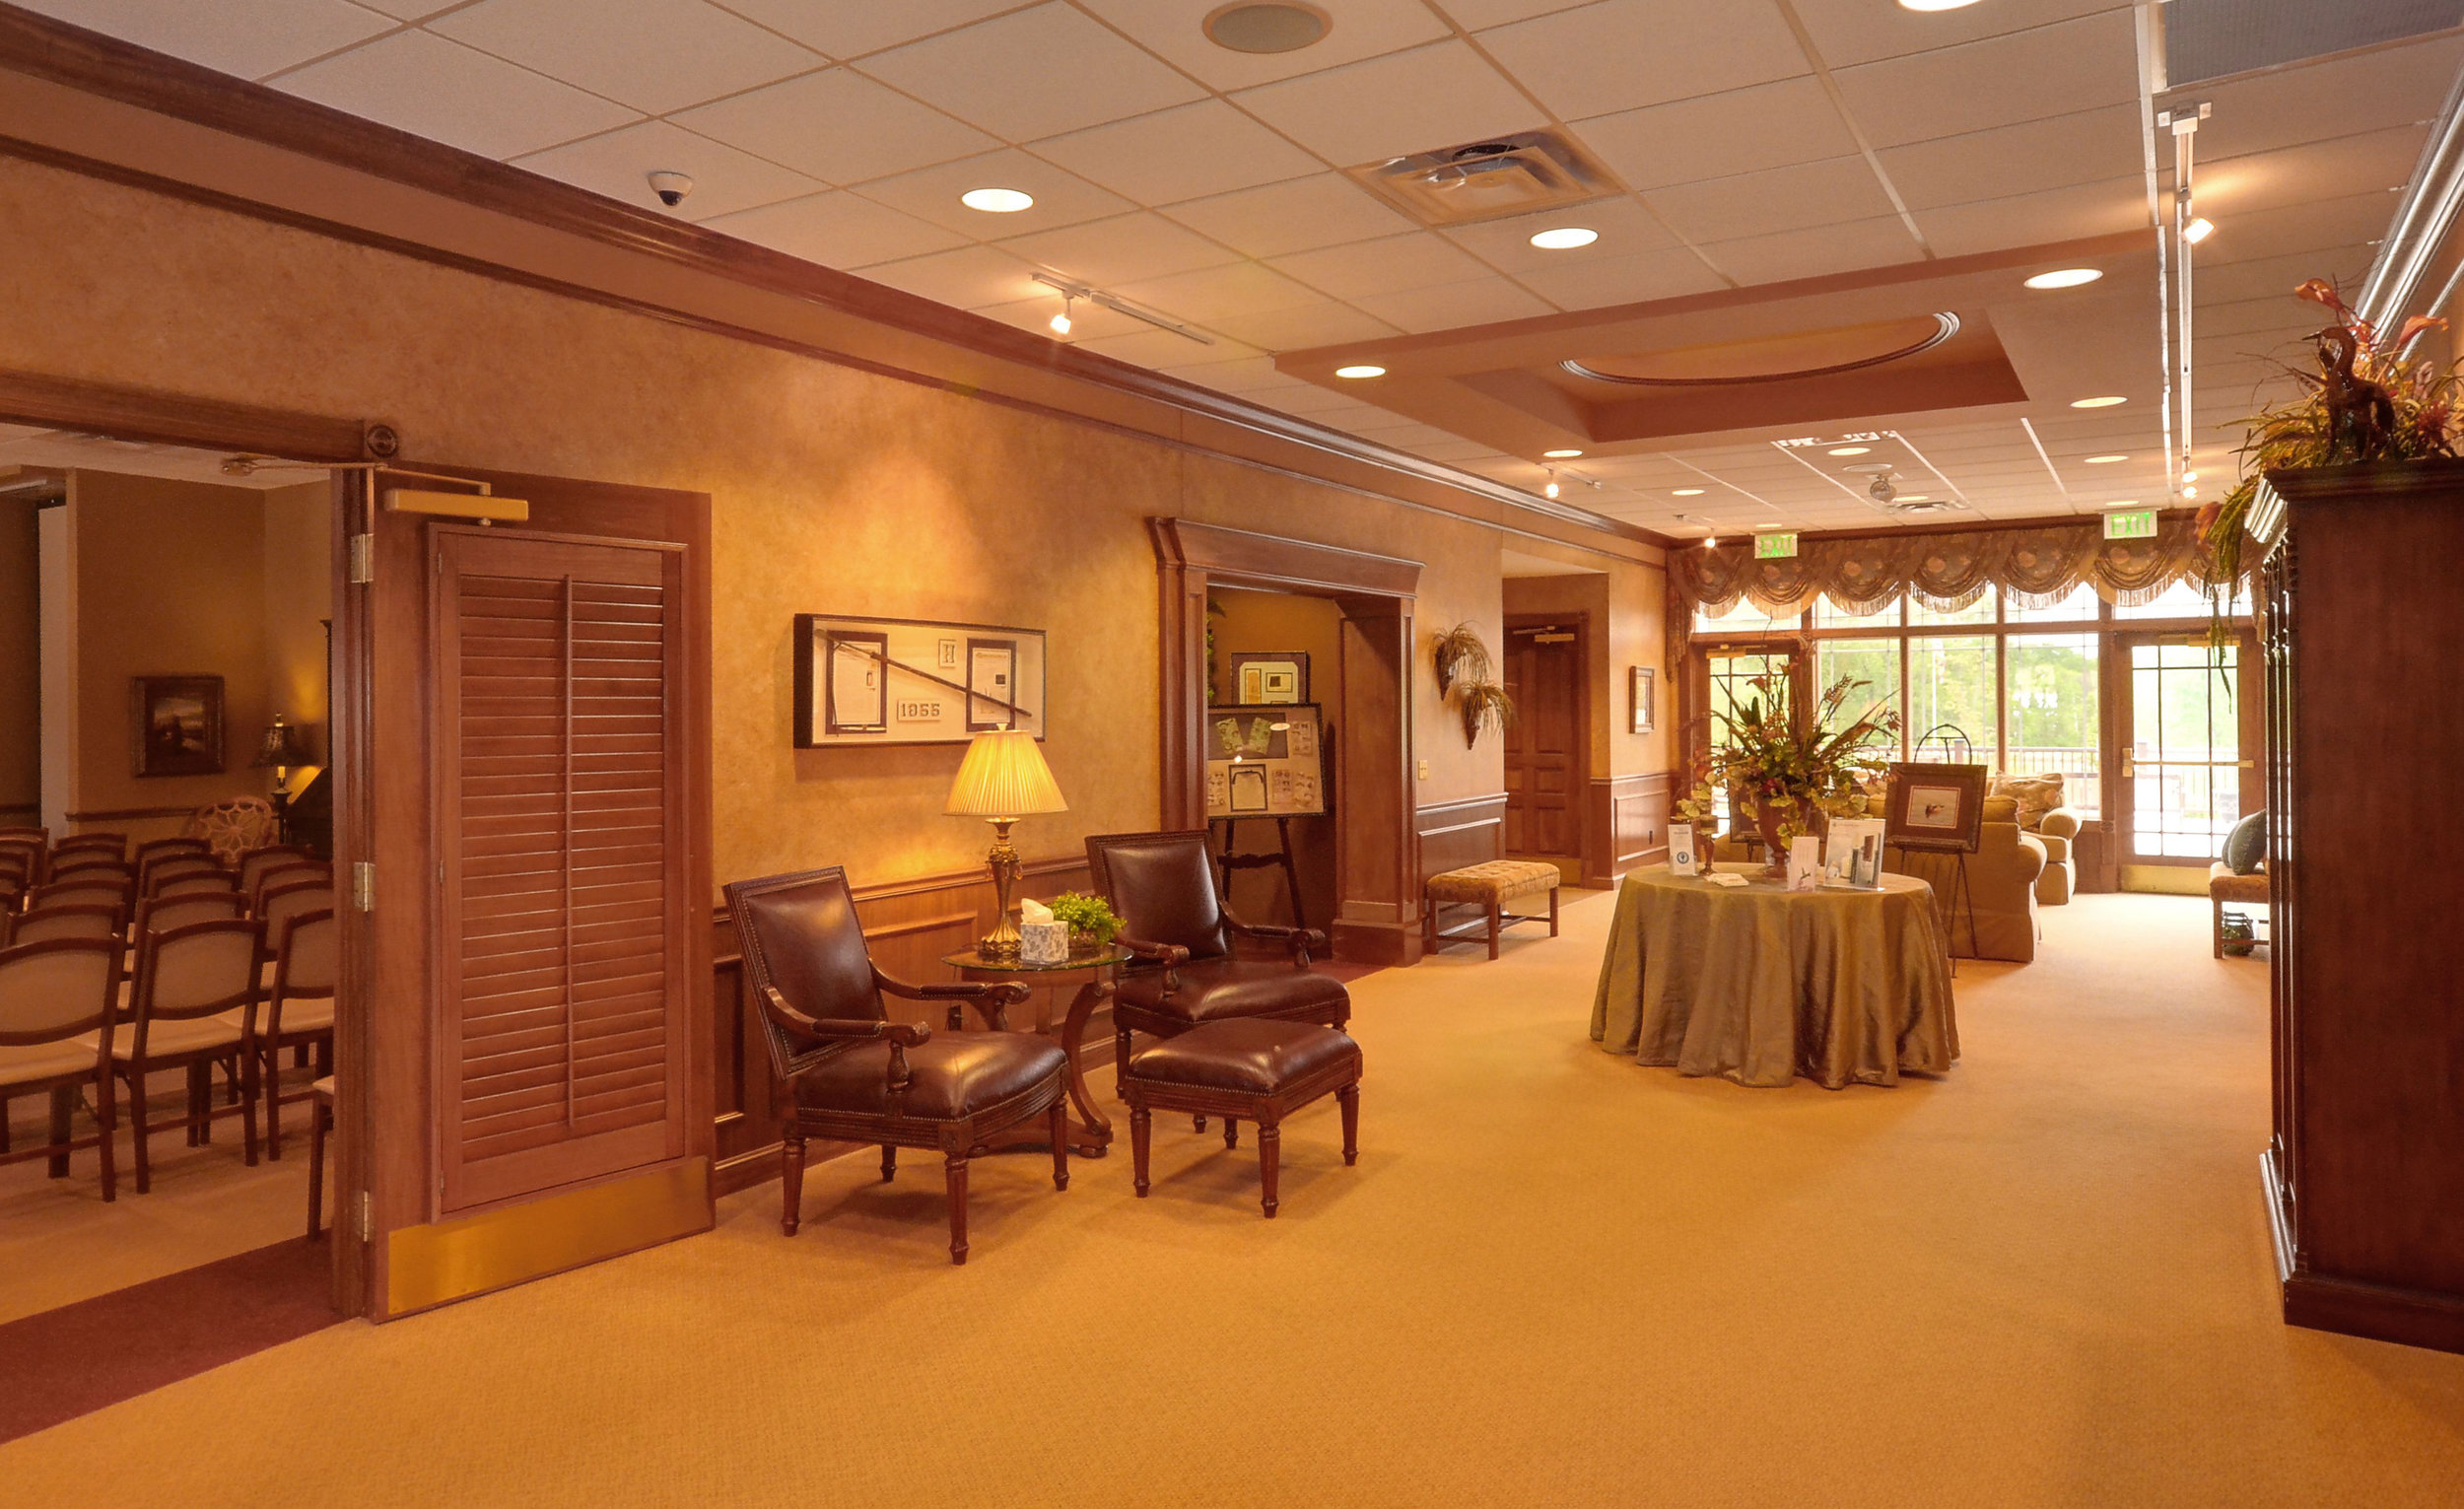 Sunset Hills Funeral Home Interior (Copy)